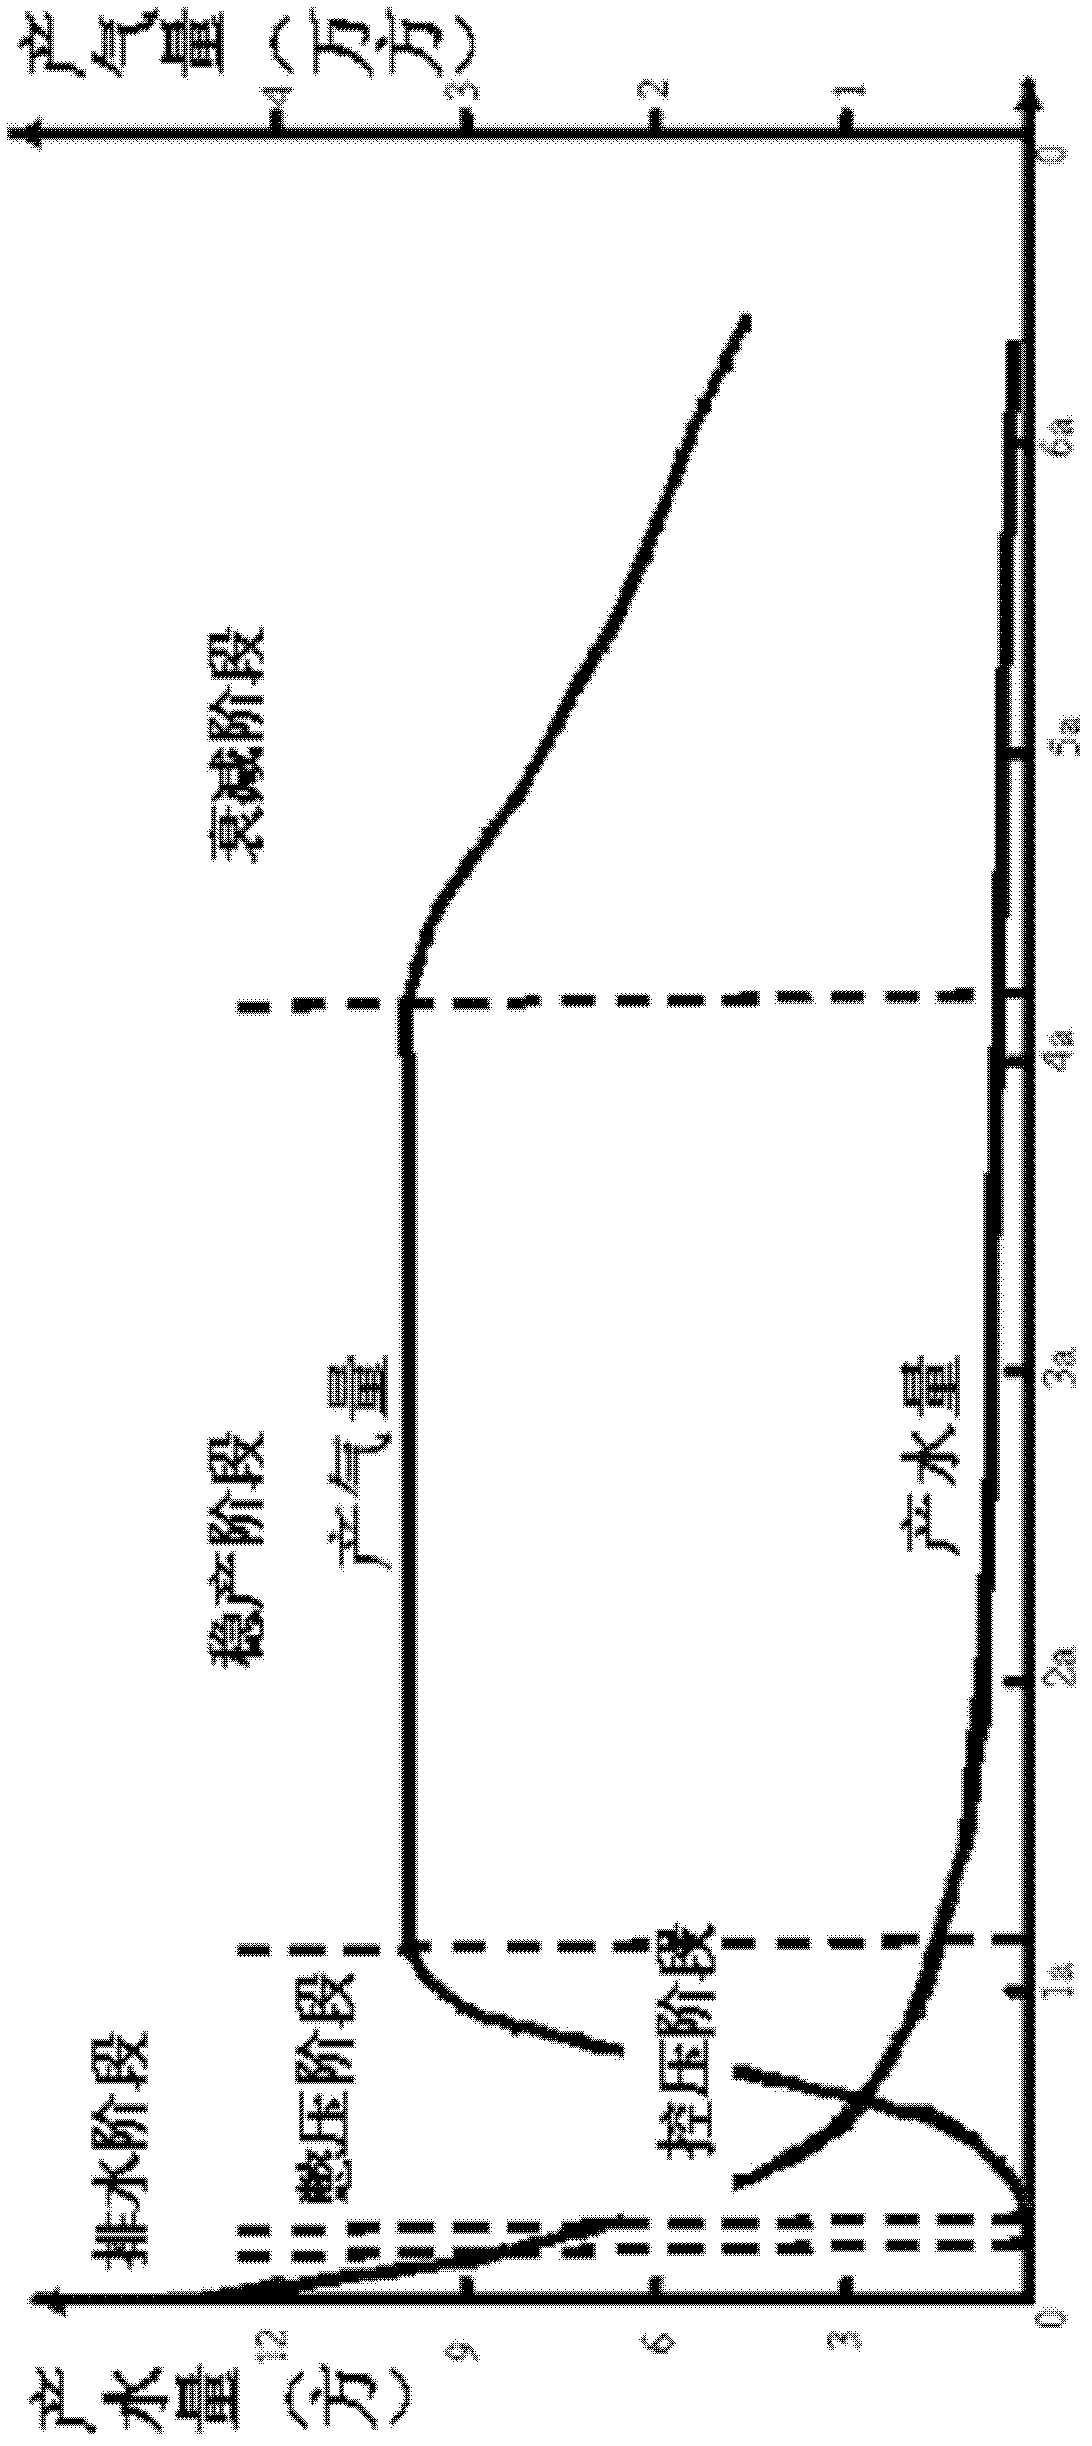 Method of gas recovery by water drainage for high-coal-rank coal-bed methane well